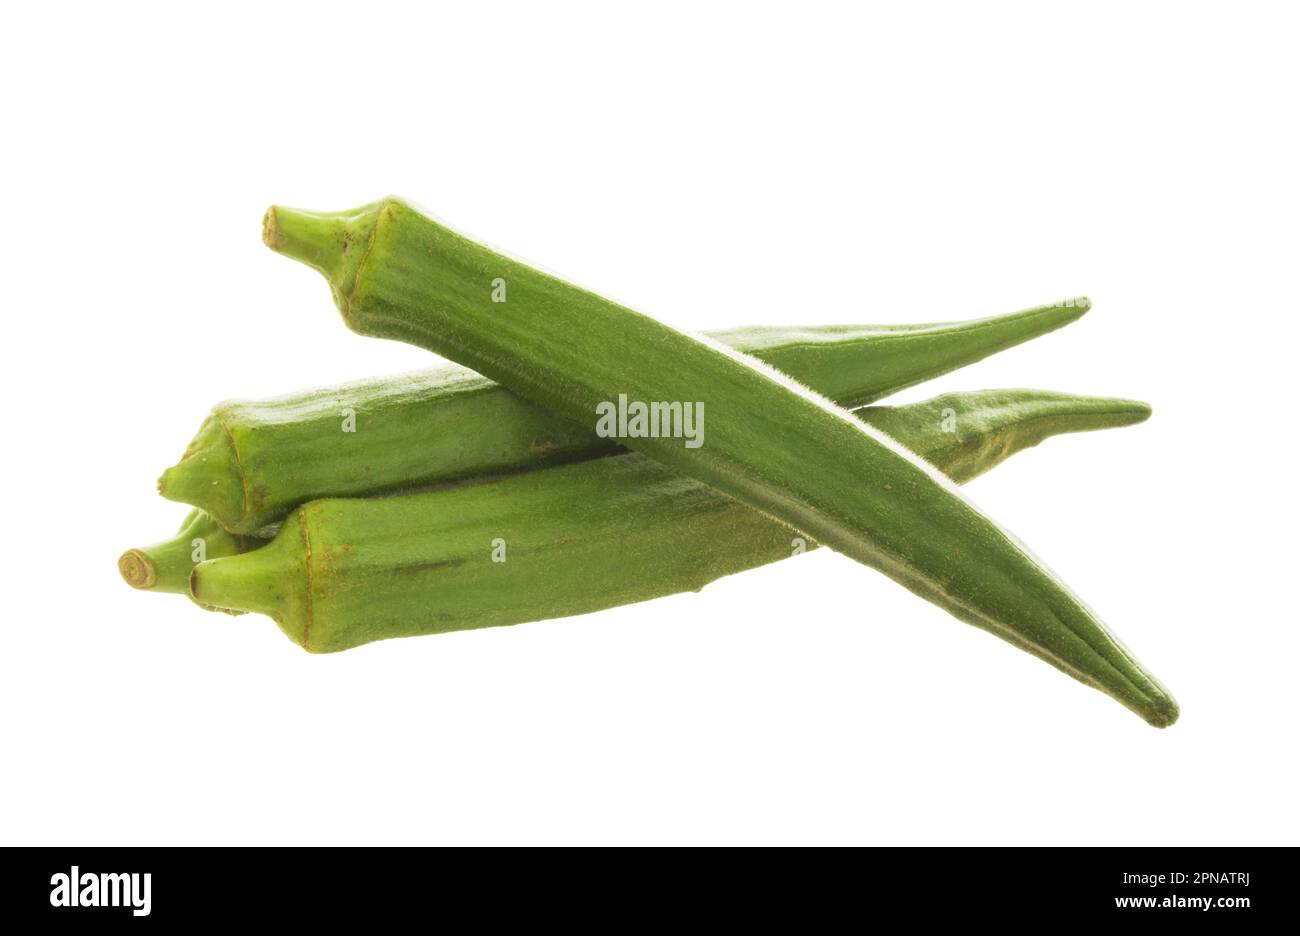 okra ladys finger bhindi and bamies vegetables and herbs isolated on a white background 2PNATRJ